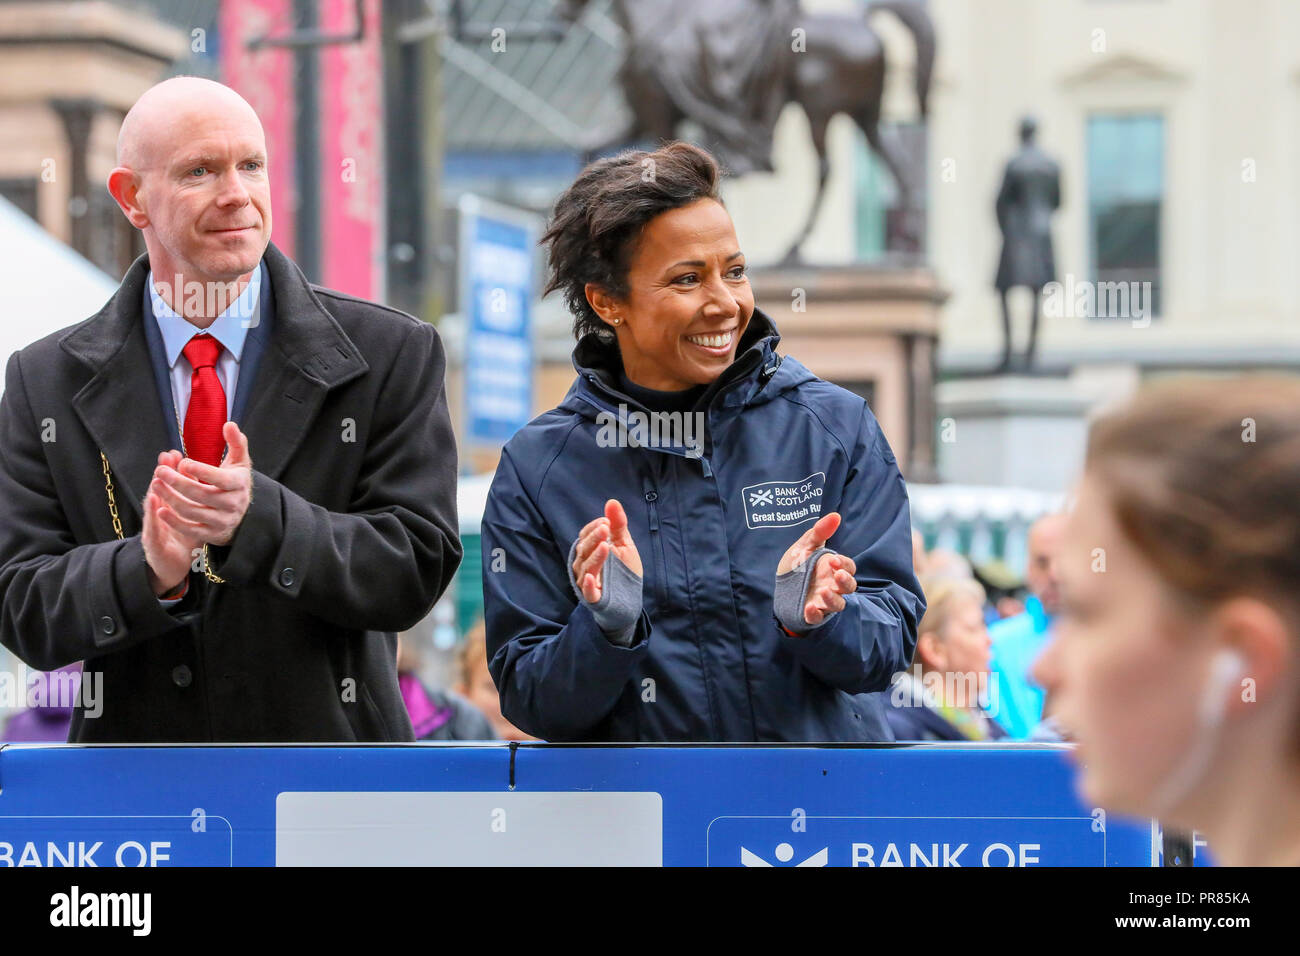 Glasgow, UK. 30th Sept 2018. Thousands of runners turned out to take part in the annual Great Scottish Run, running either 10k or half marathon, through the Glasgow city centre, across the Kingston Bridge over the River Clyde and finishing at Glasgow Green. The runners were cheered off by Colonel Dame Kelly Holmes who was this years Ambassador for the Run Credit: Findlay/Alamy Live News Stock Photo